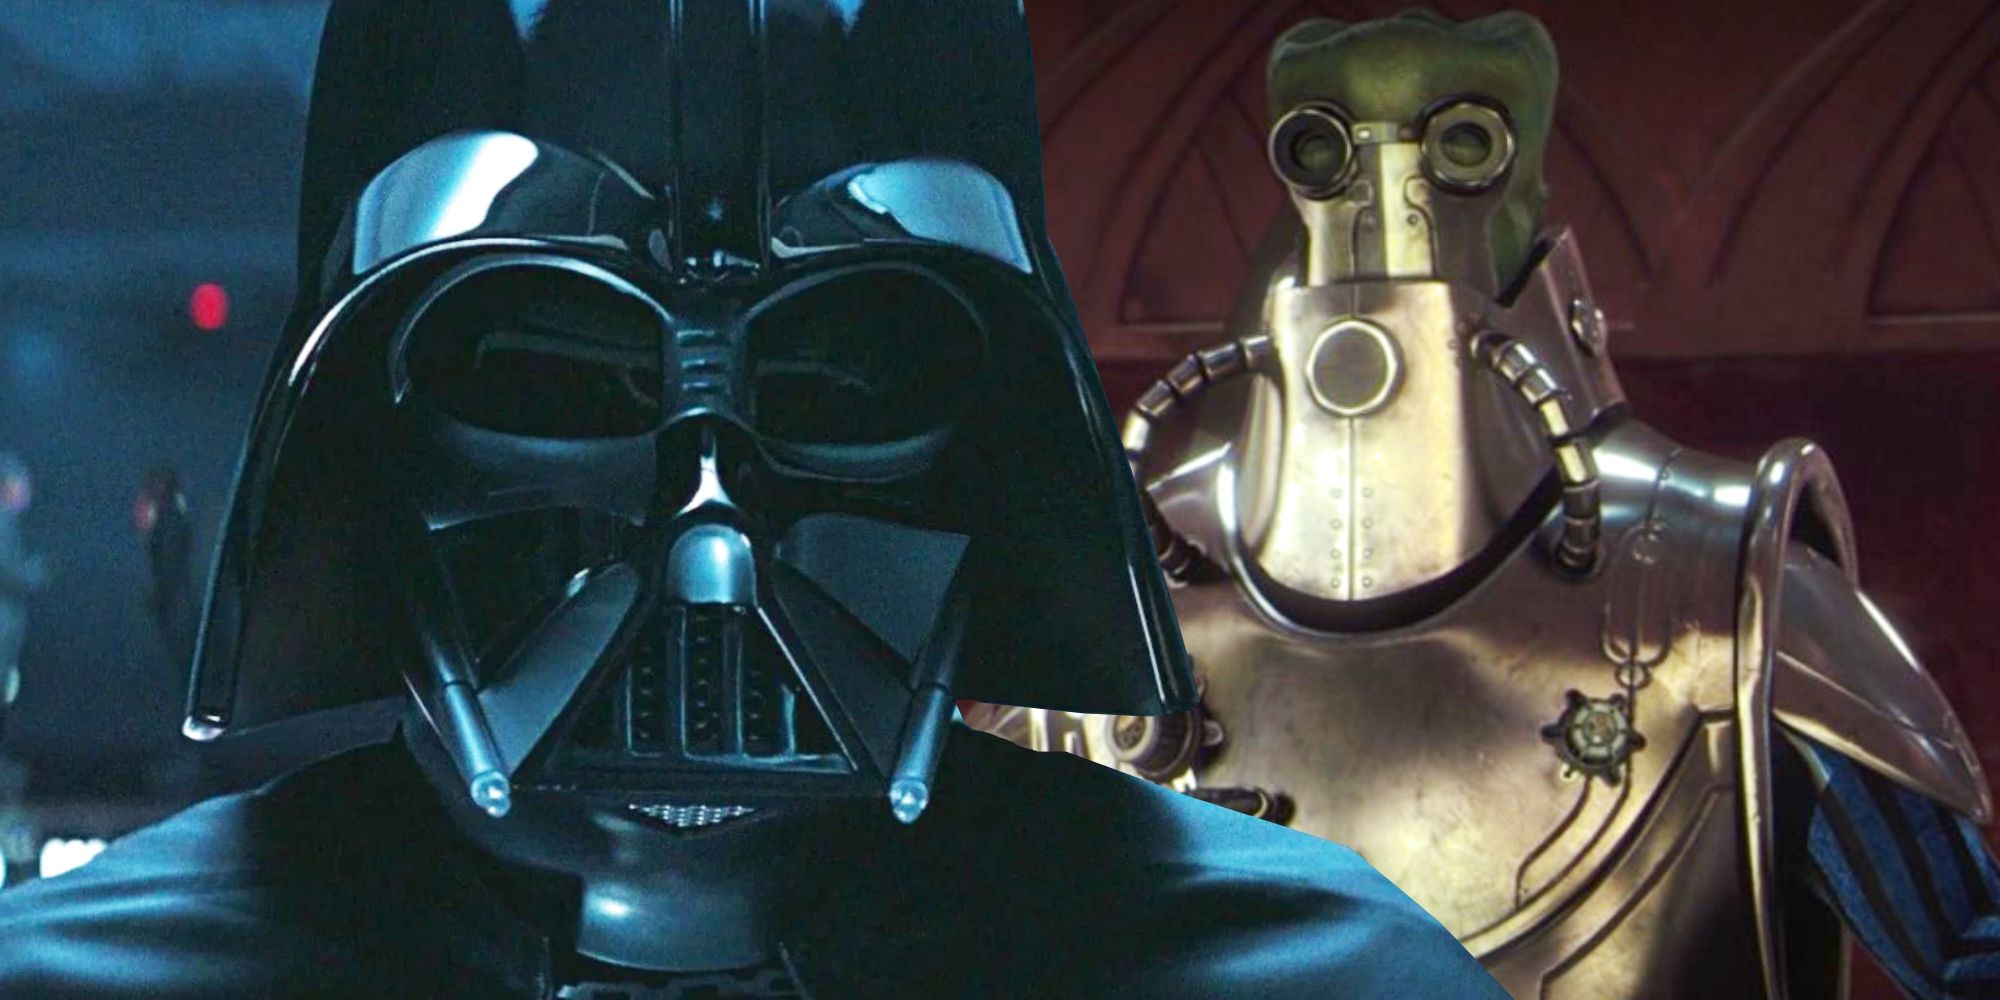 Darth Vader and the Techo Union's Wat Tambor in Star Wars.